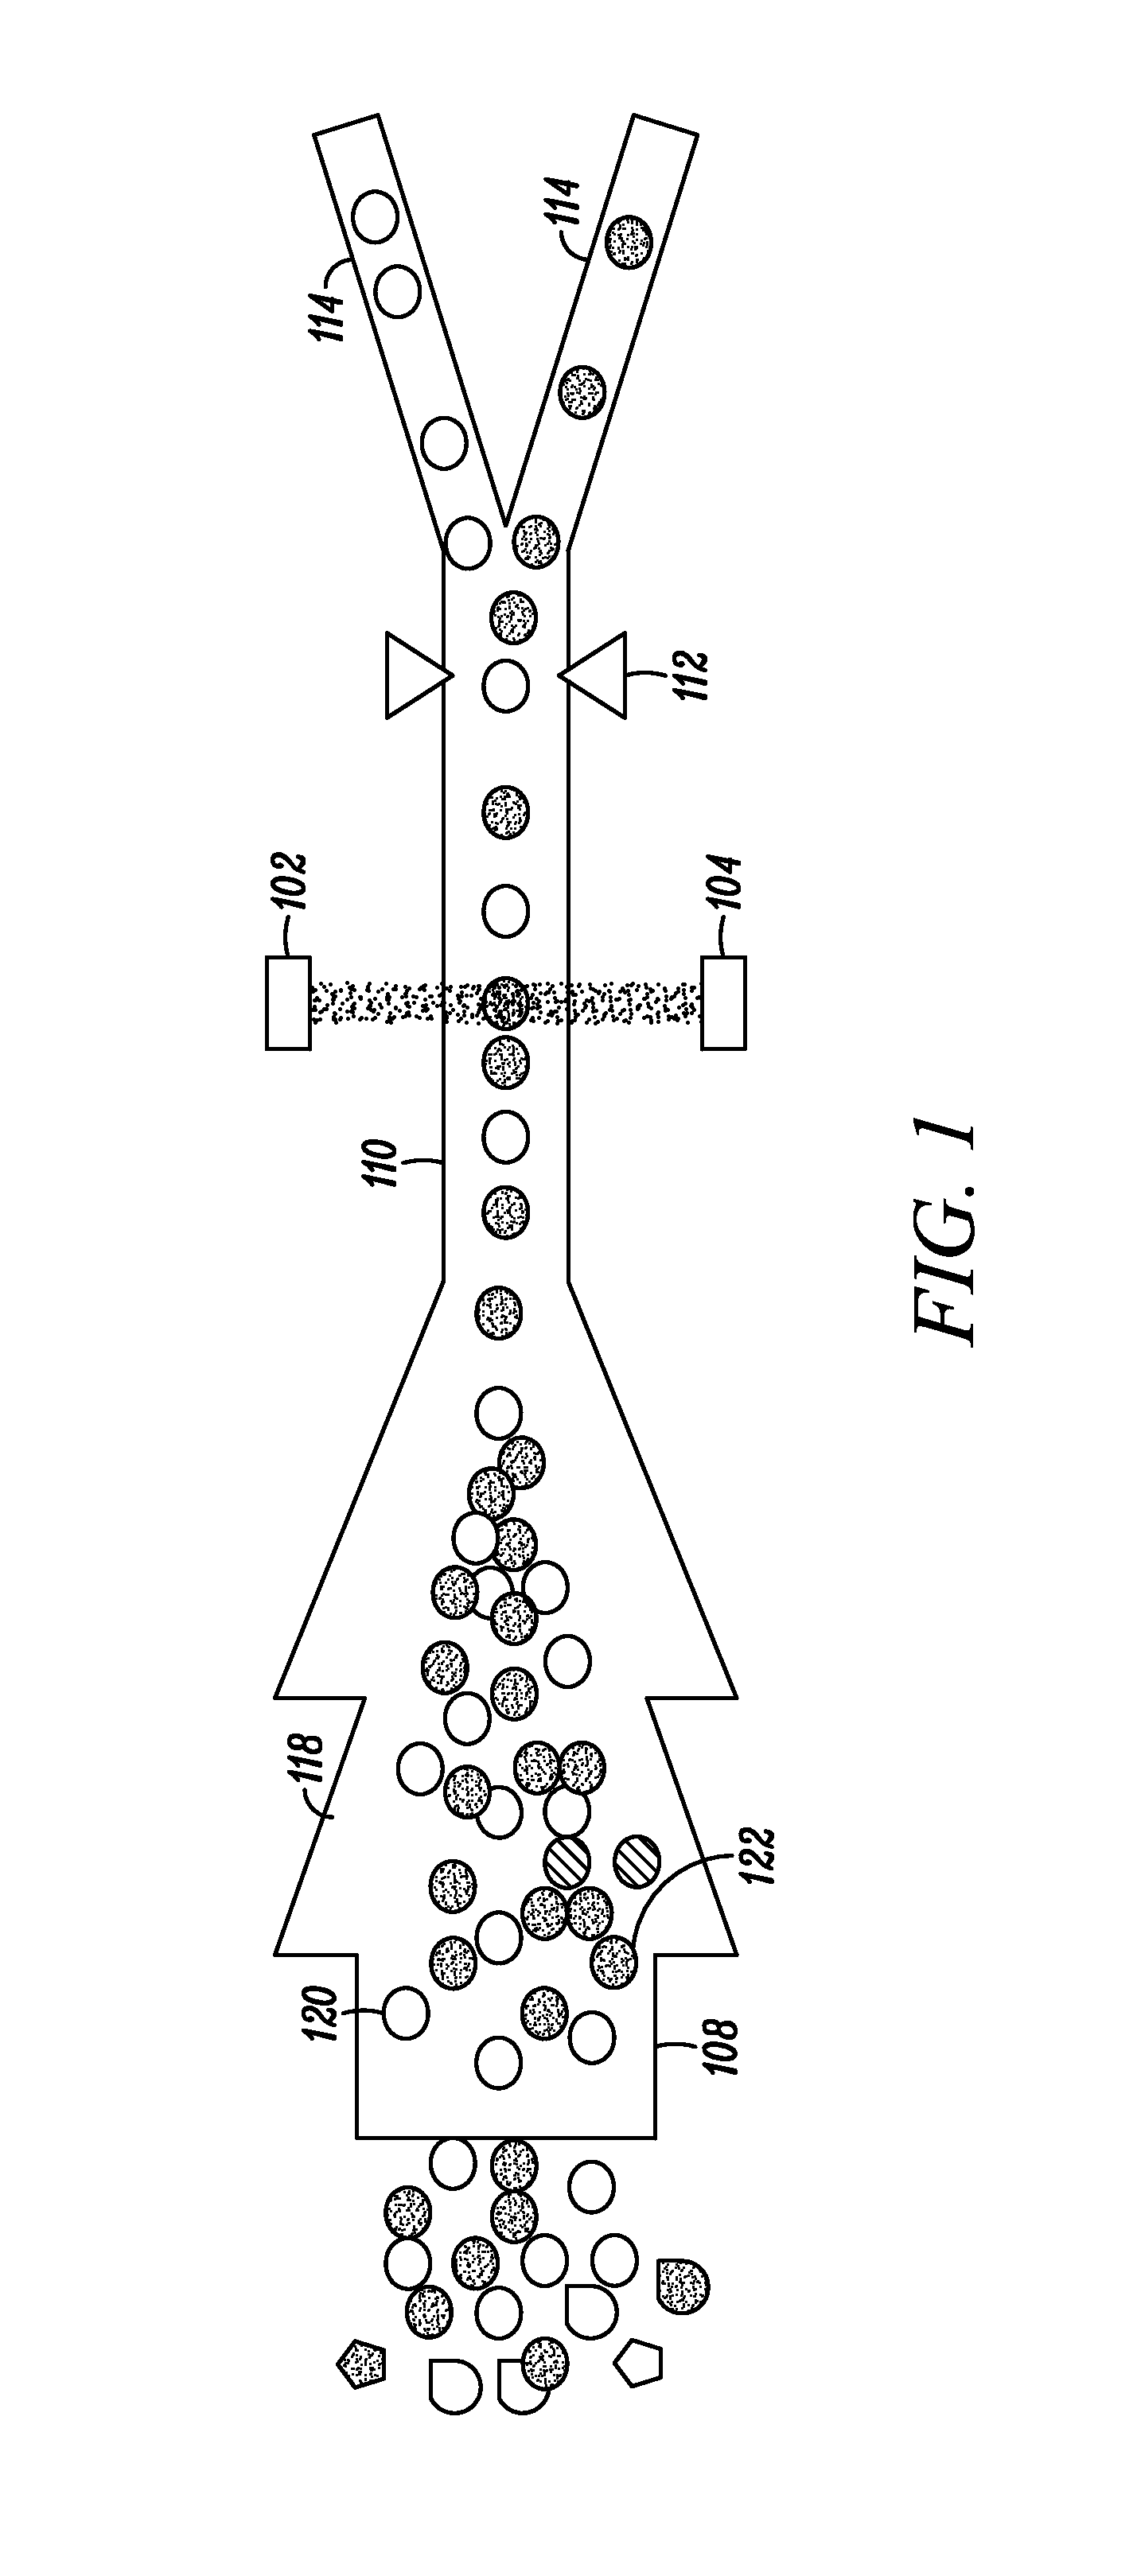 Cytometry system with quantum cascade laser source, acoustic detector, and micro-fluidic cell handling system configured for inspection of individual cells